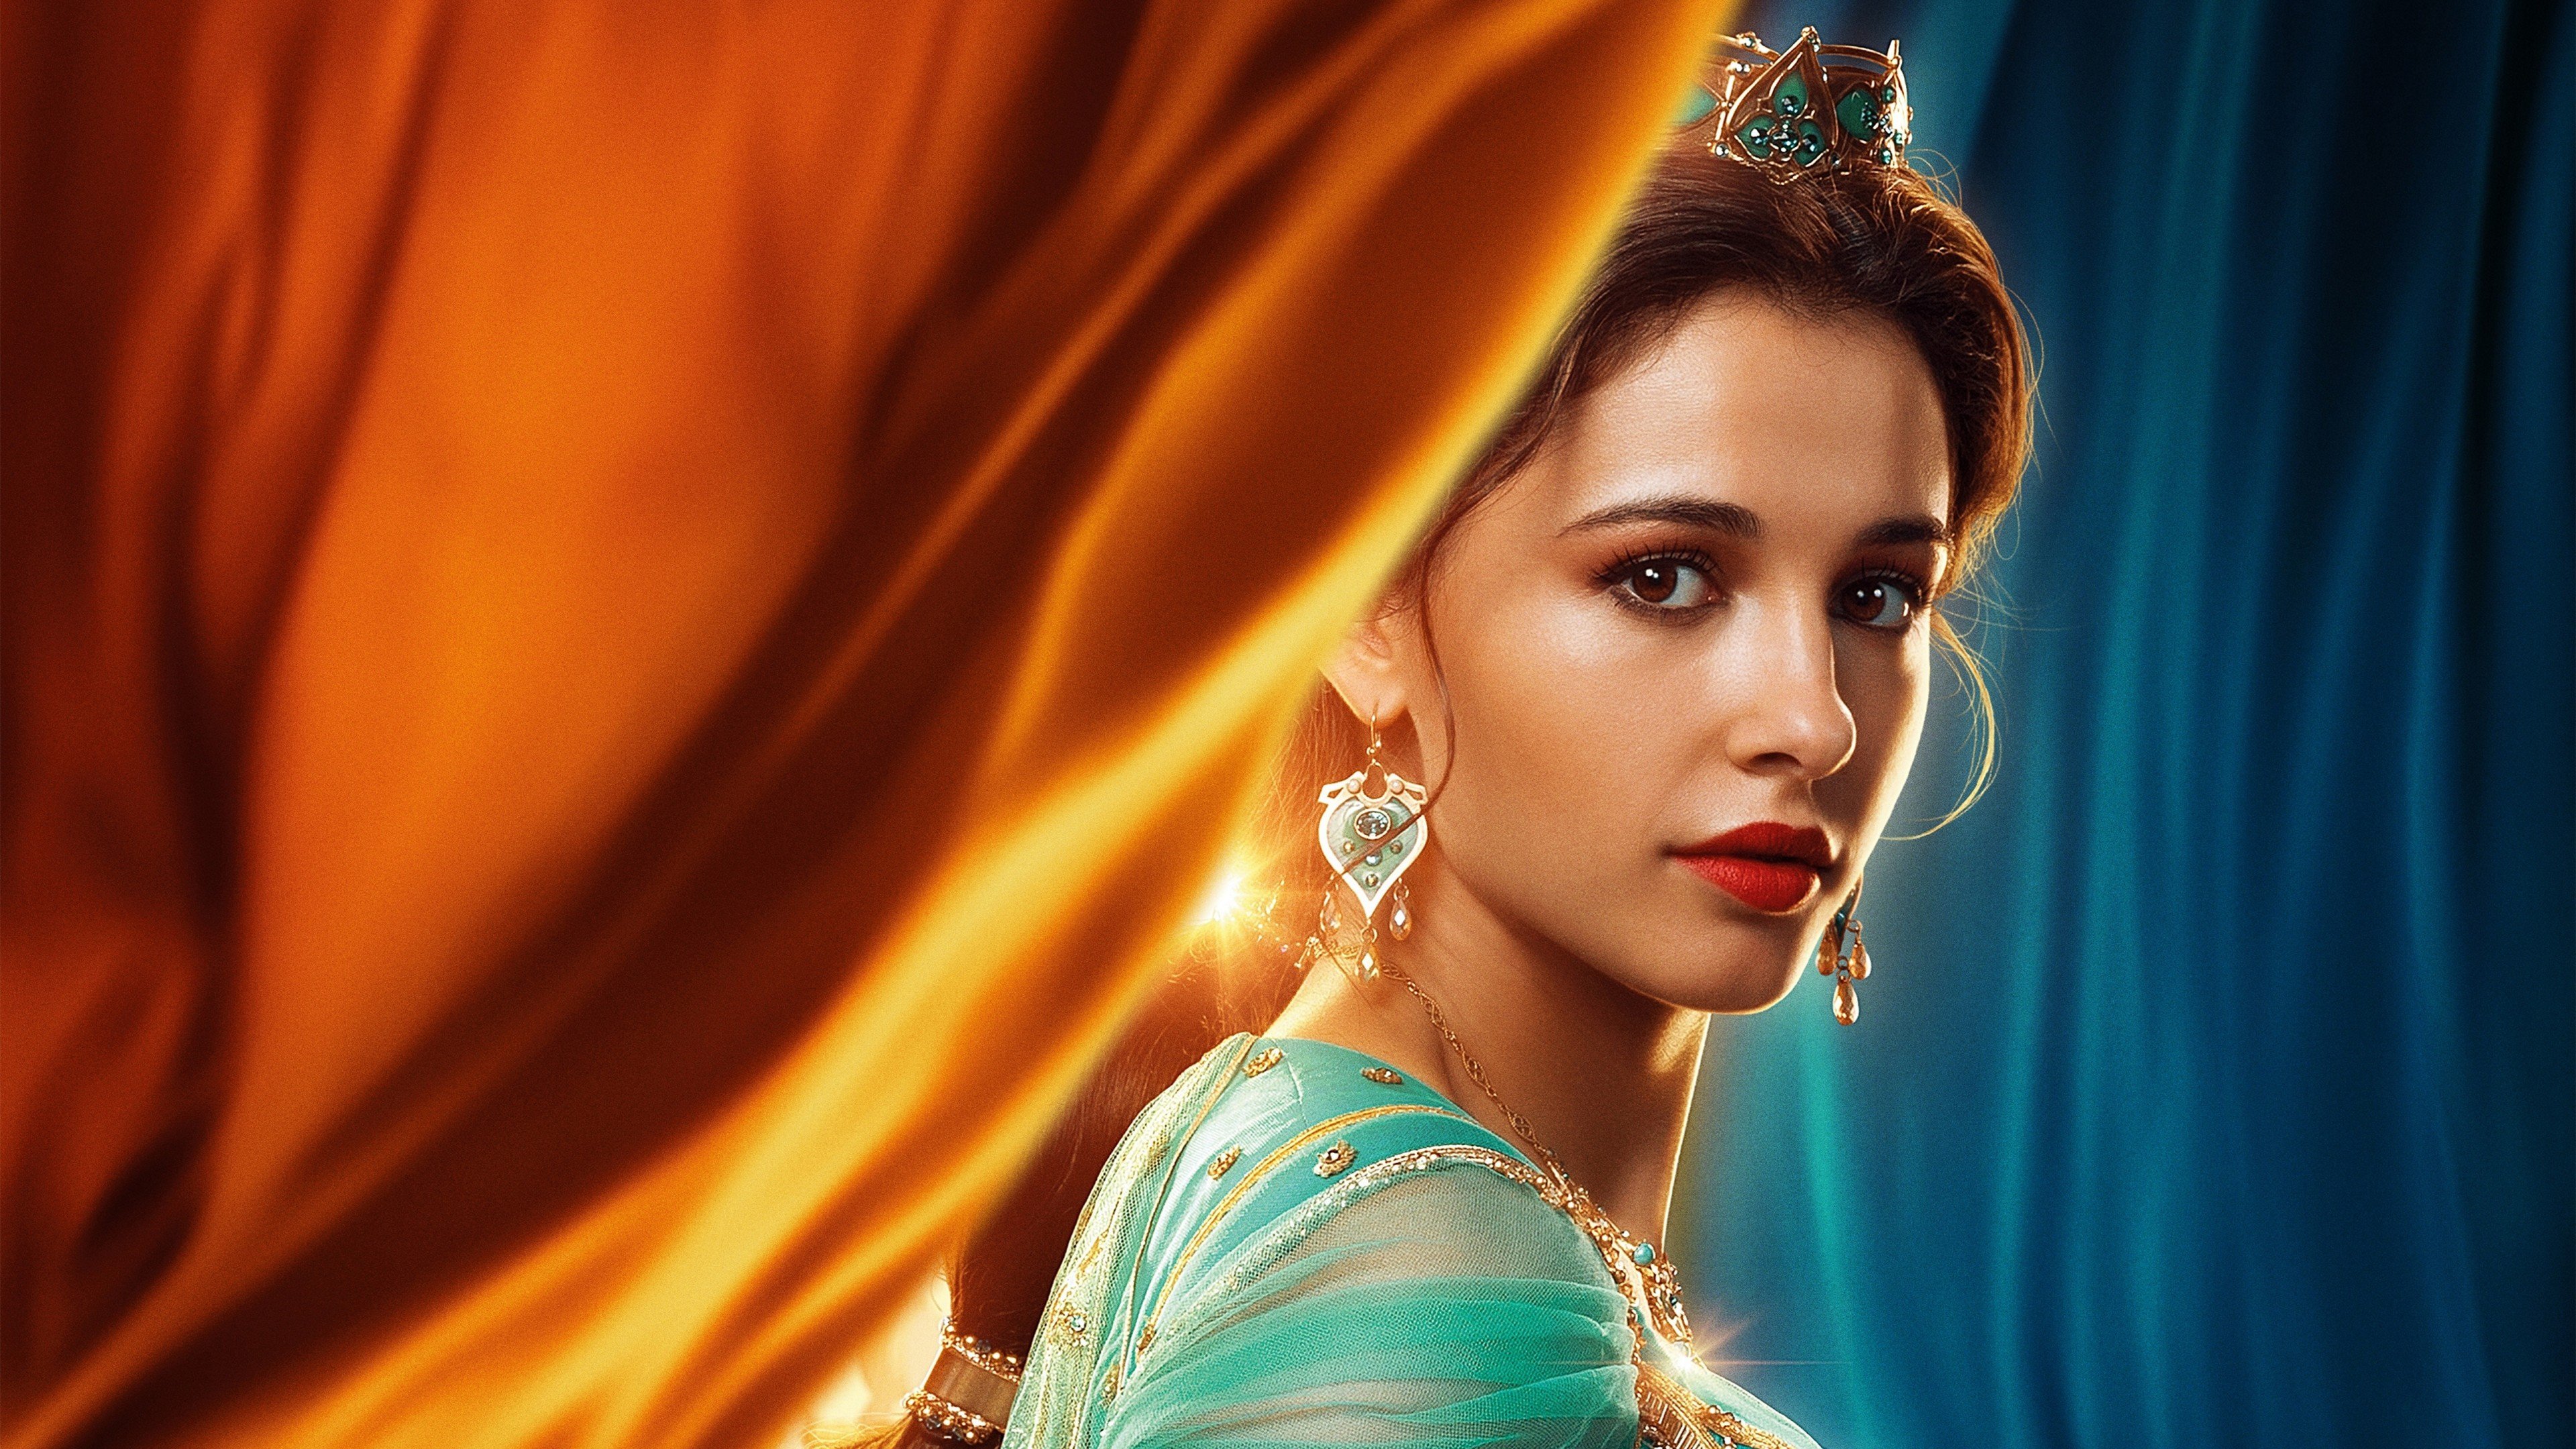 5 Reasons Why Princess Jasmine Makes a Wonderful Role Model For Young Women